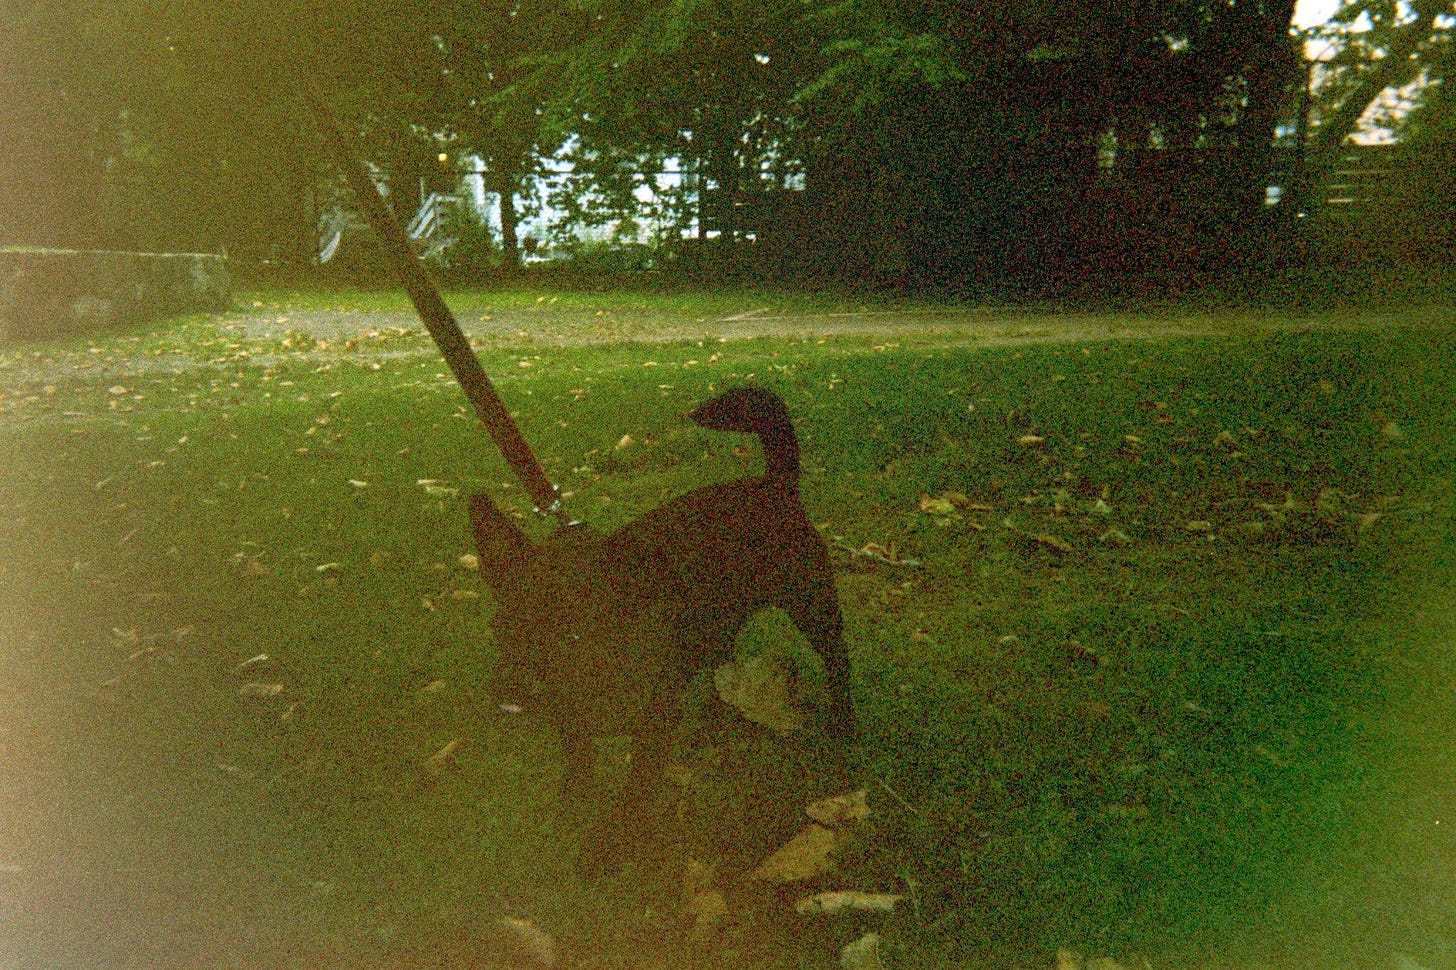 Paying the dog tax with a grainy film photo I took of our small black dog chilling at the park.